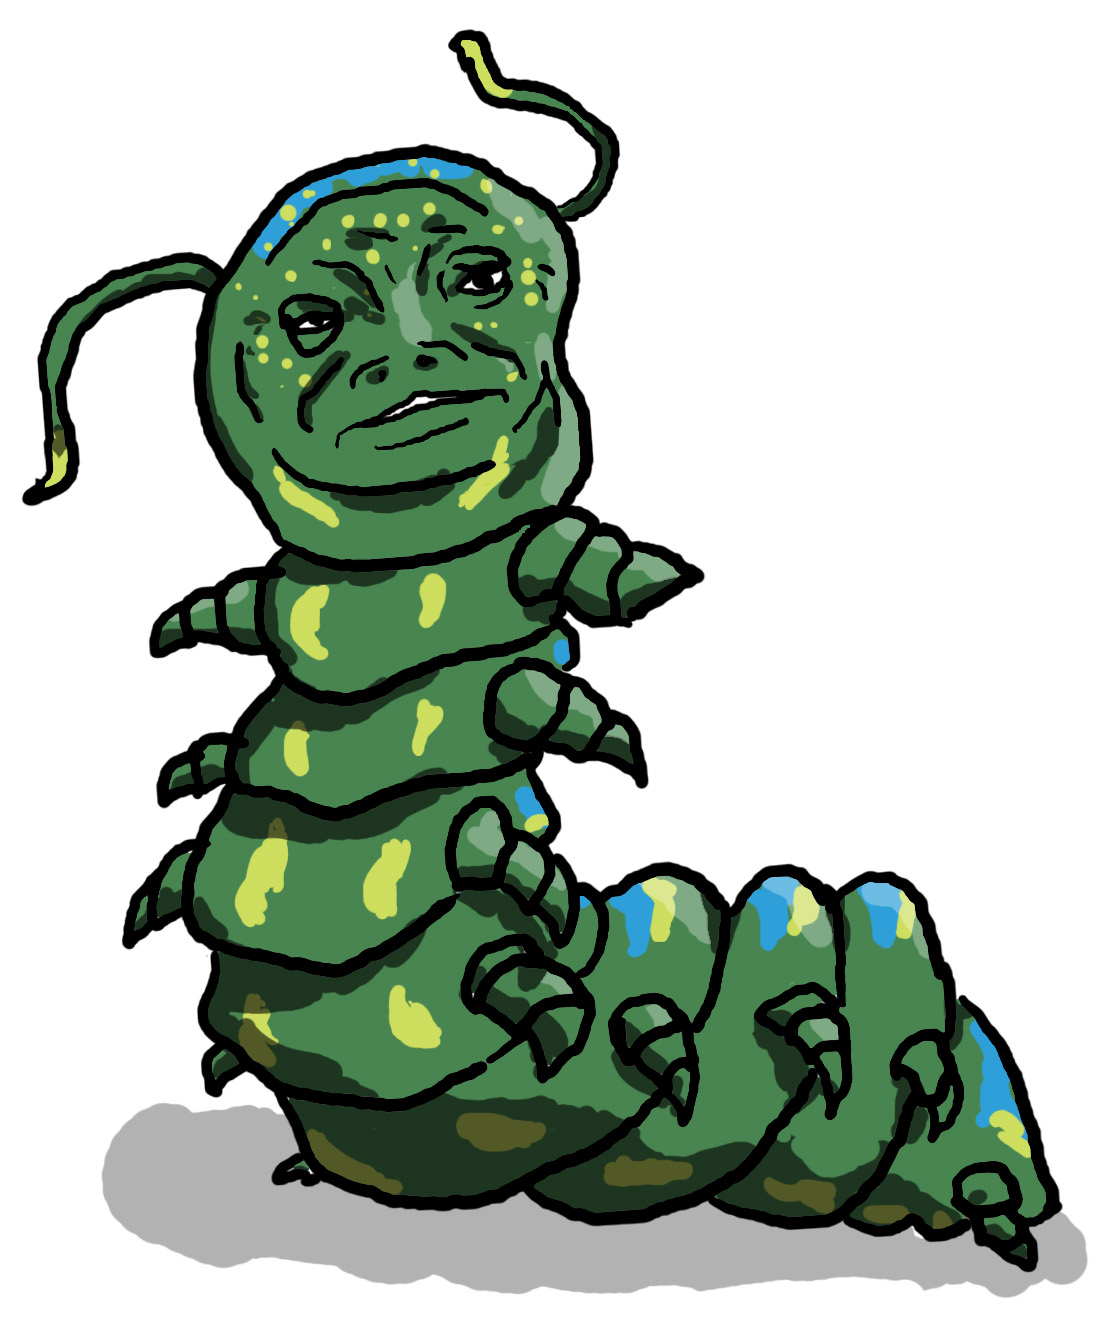  (image: http://invincible.karmavector.org/images/library_caterpillar.jpg) 